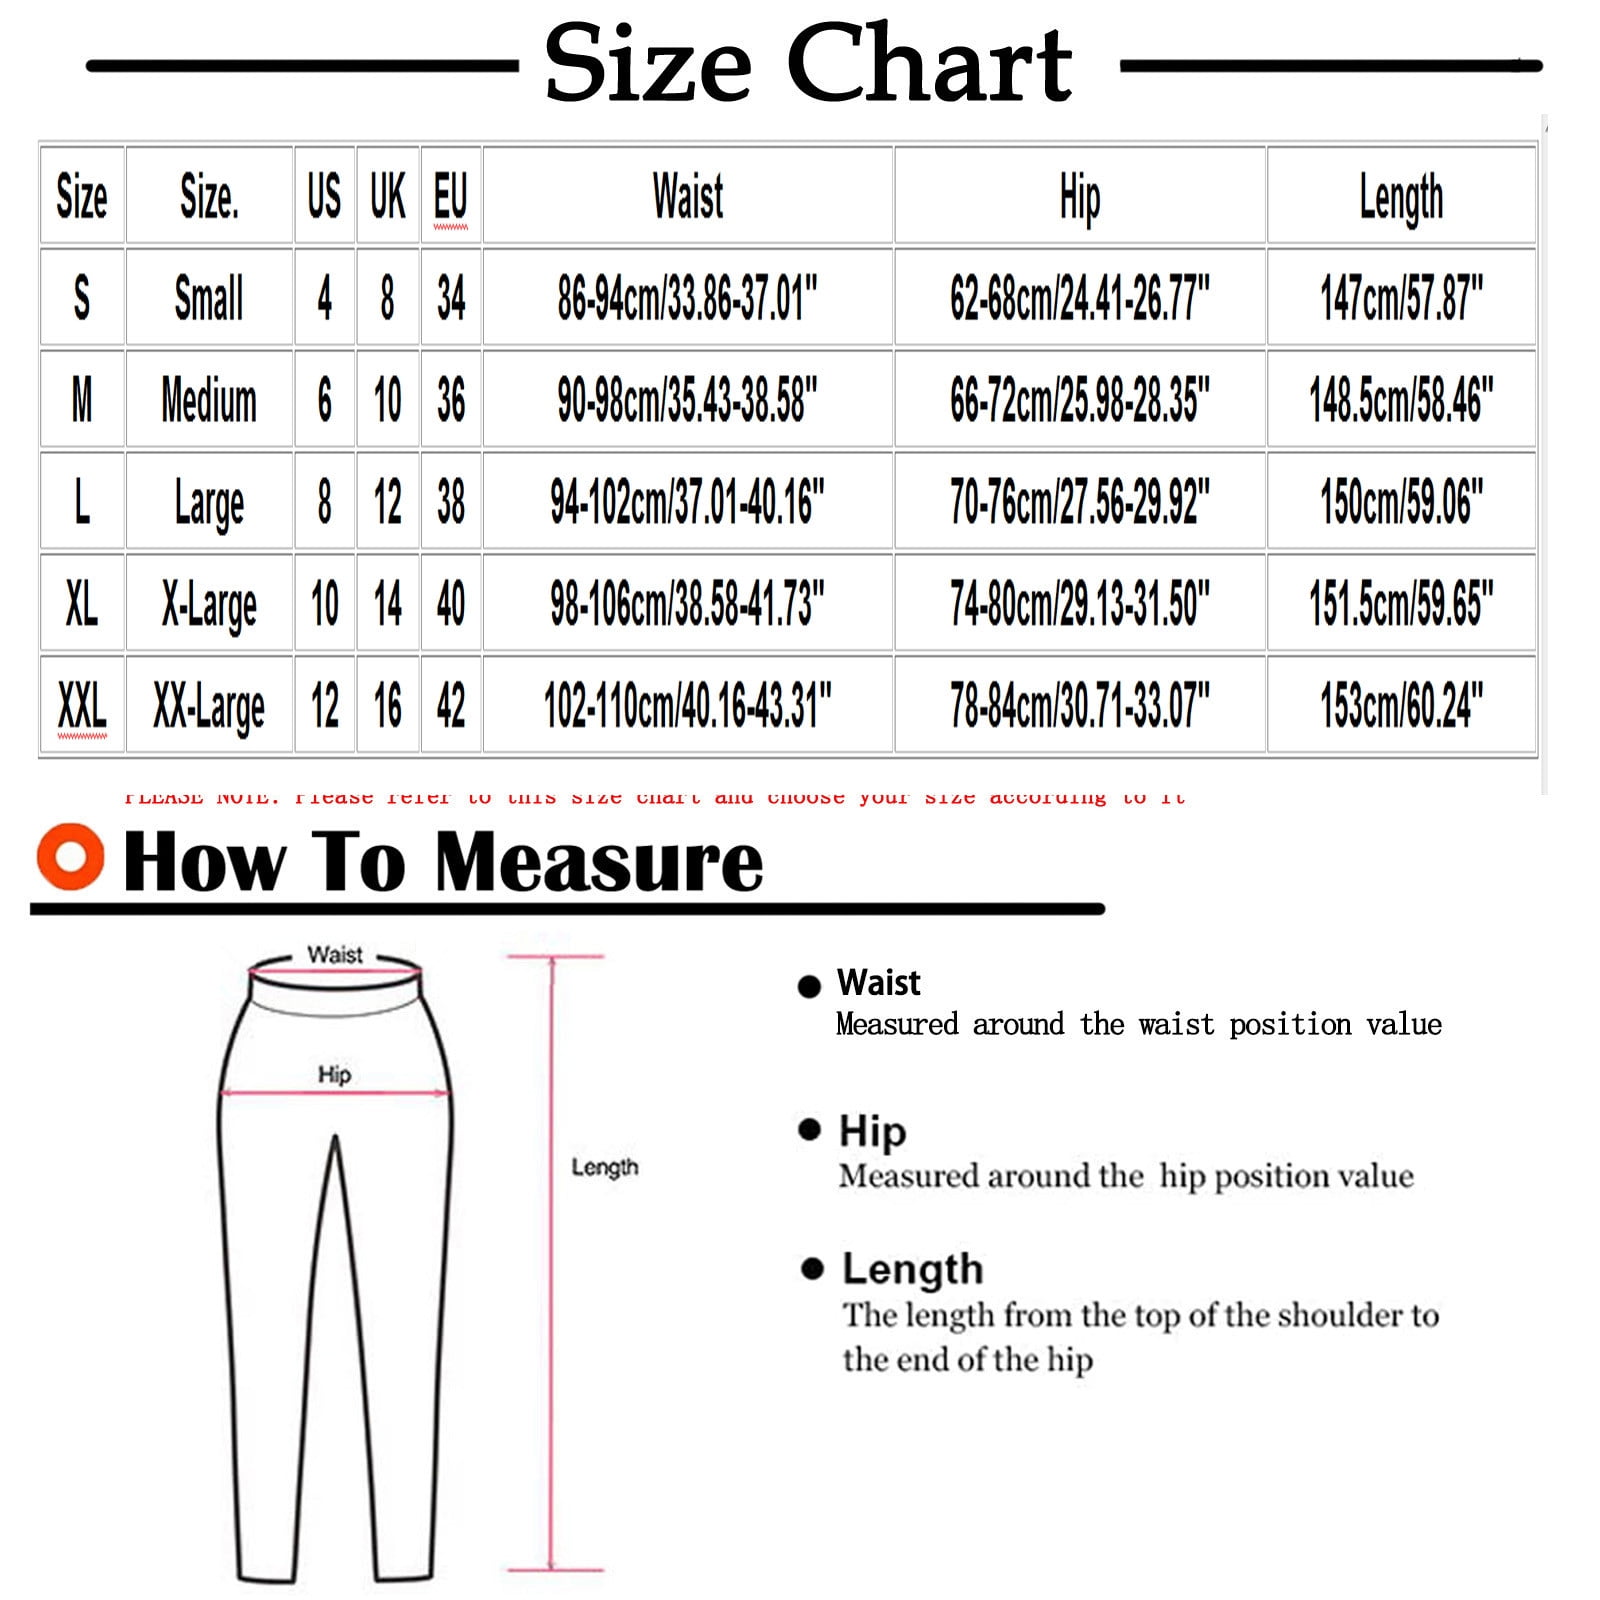 BUIgtTklOP Pants For Women Clearance Casual Temperament Solid